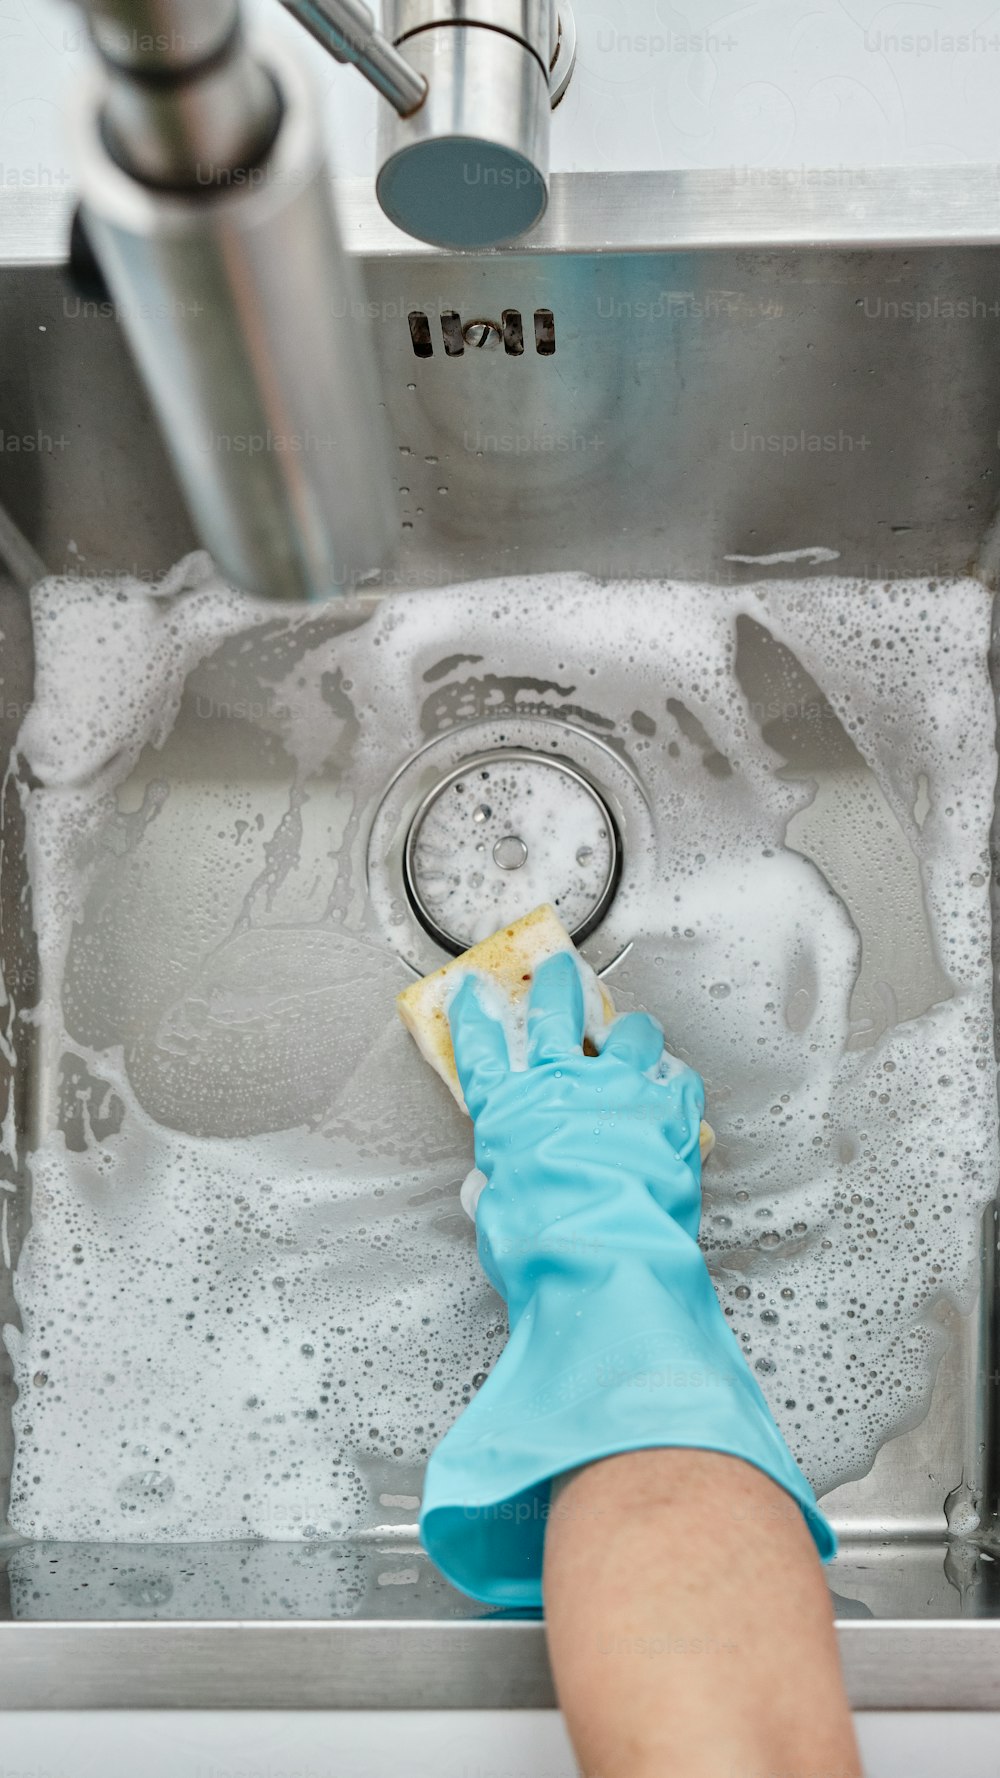 a person cleaning a sink with a blue glove